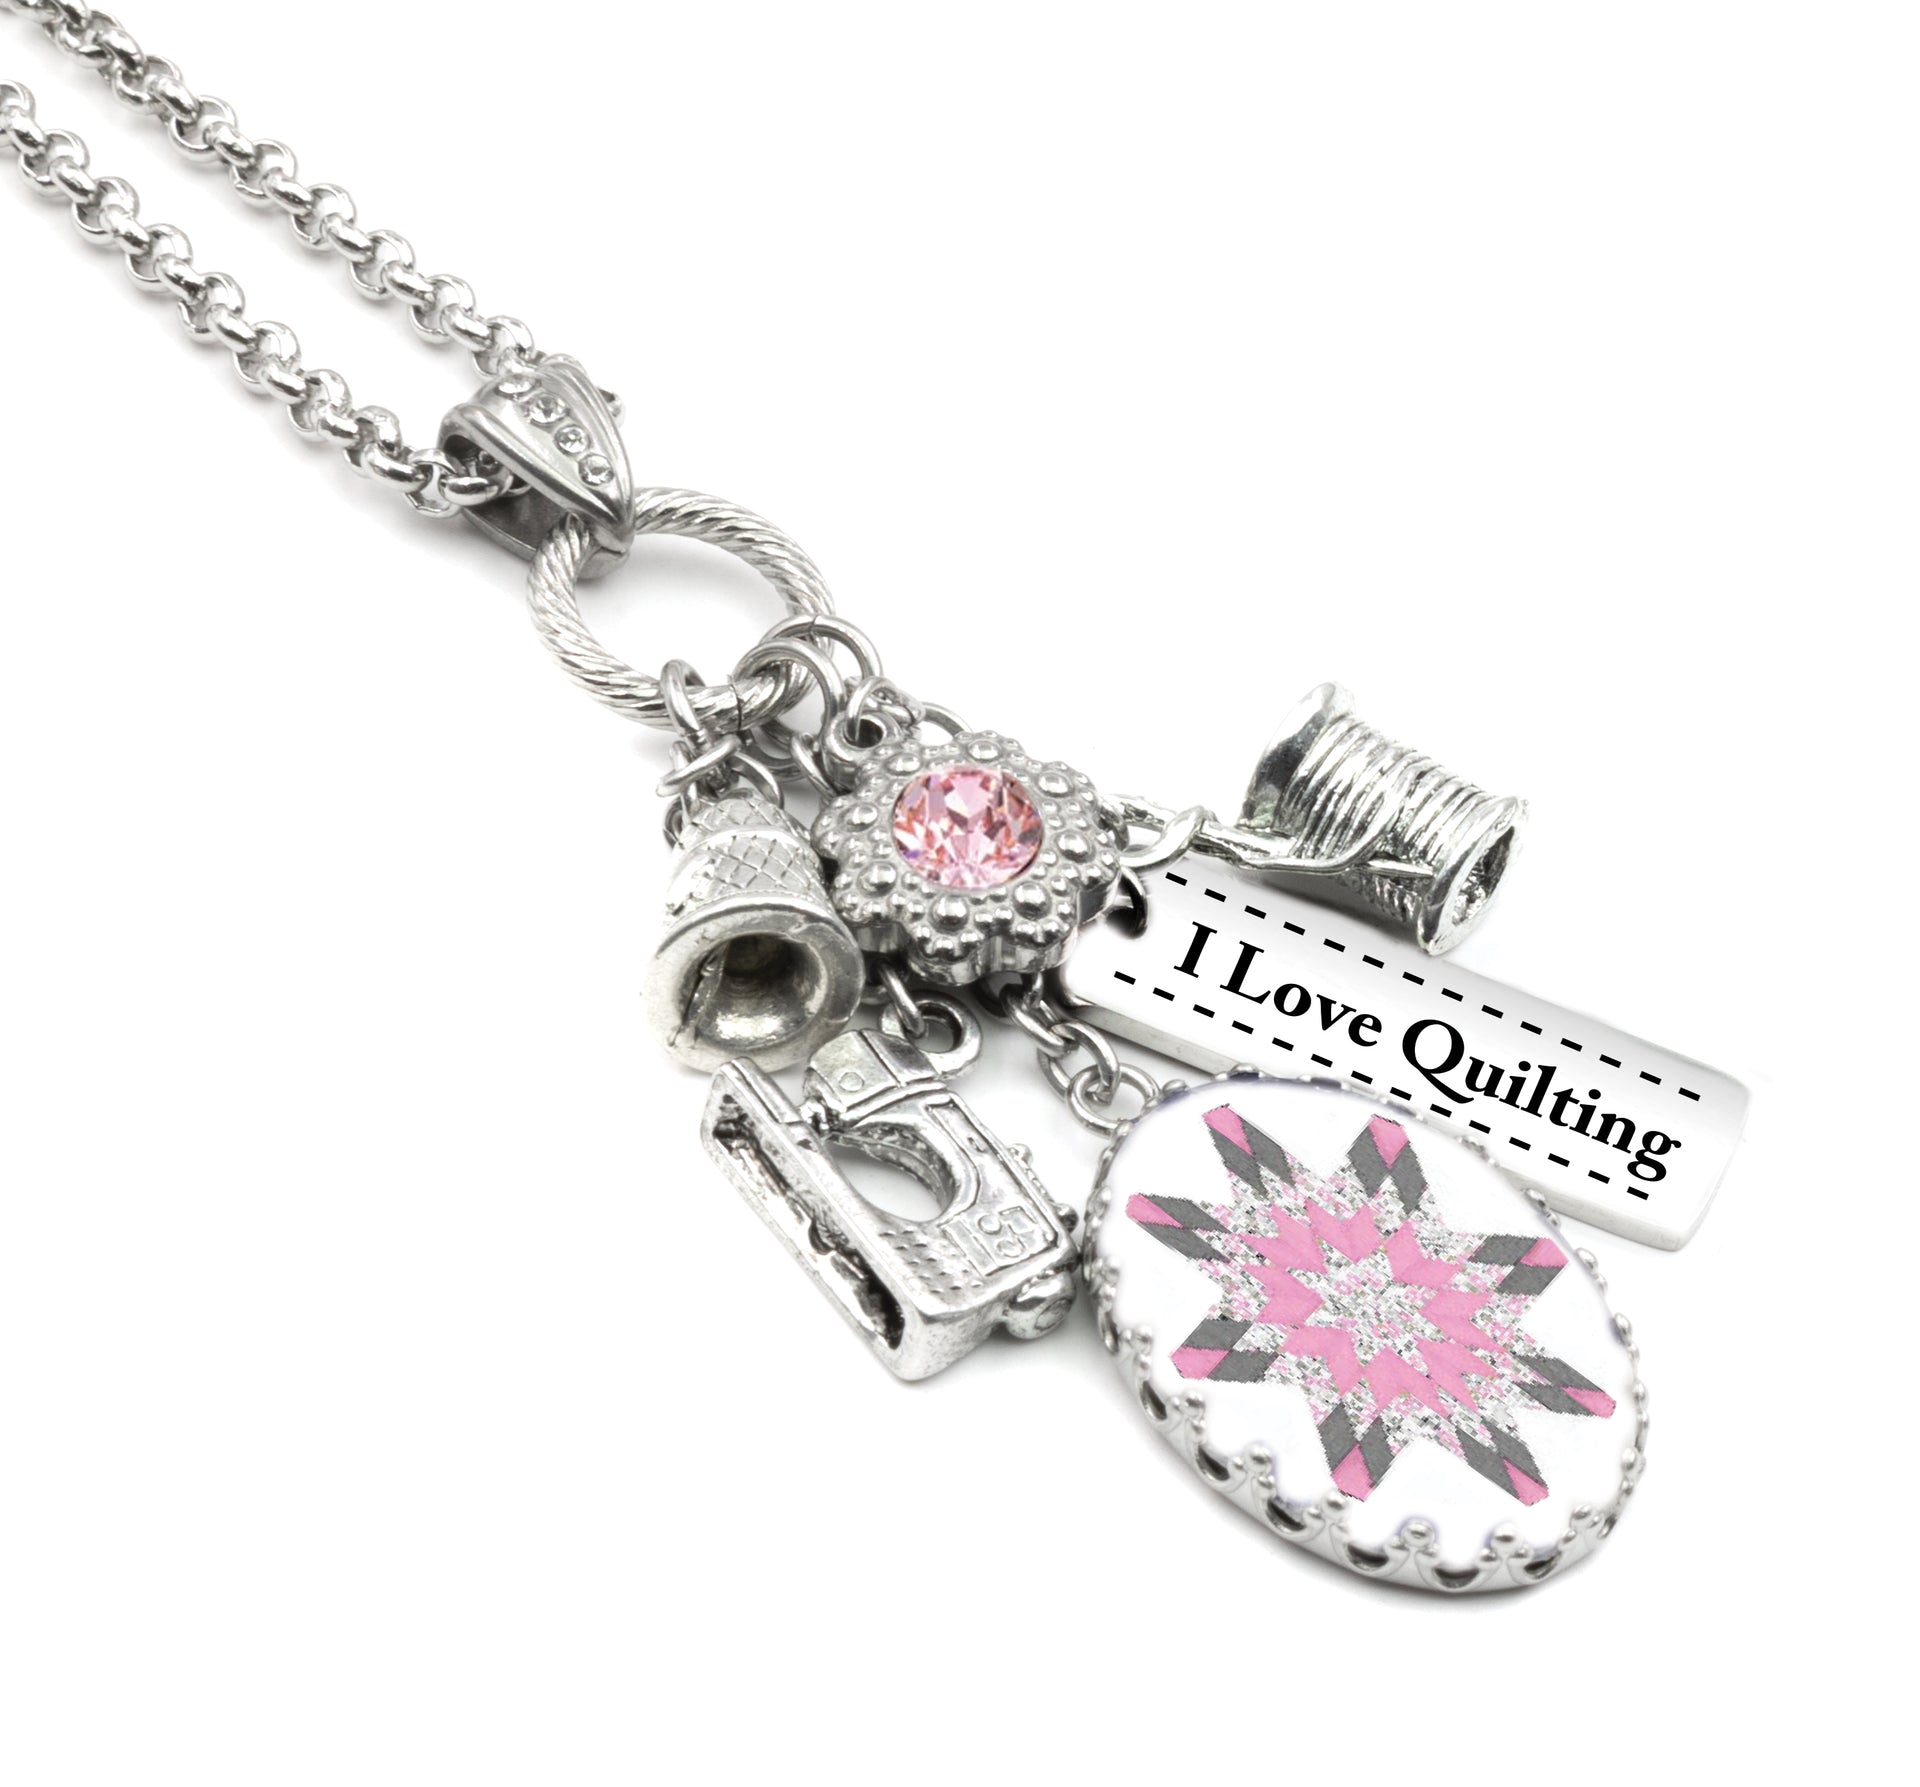 quilter charm necklace gift